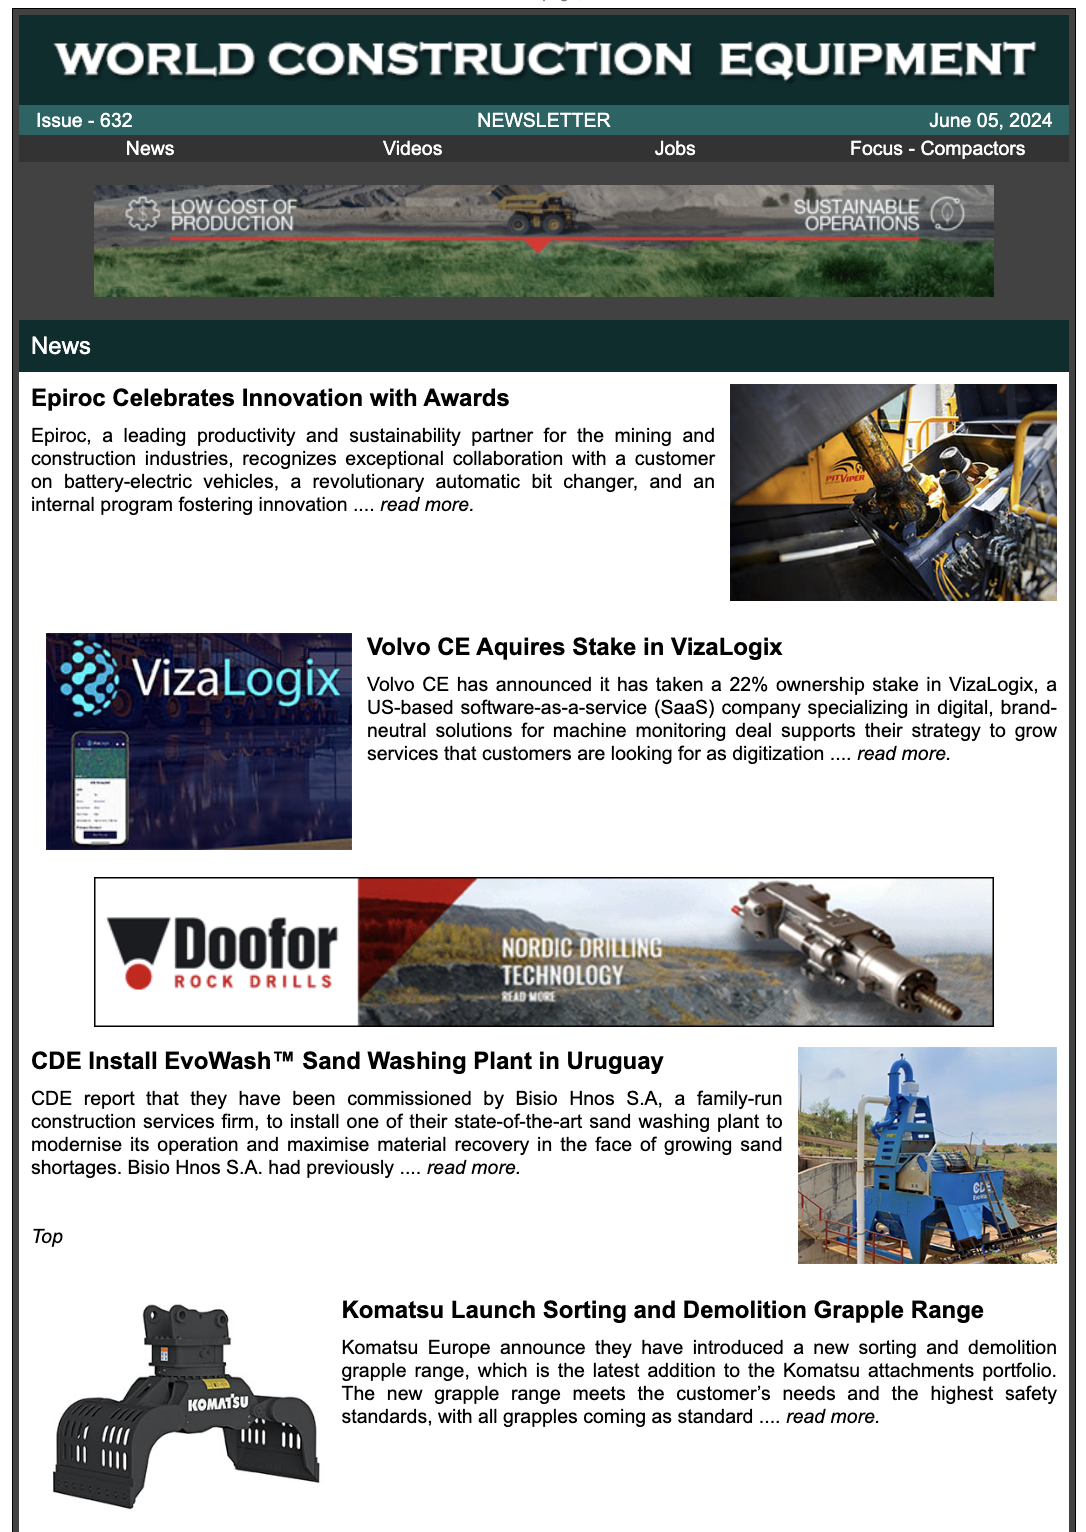 Newsletter Cover - Current World Construction Equipment Edition